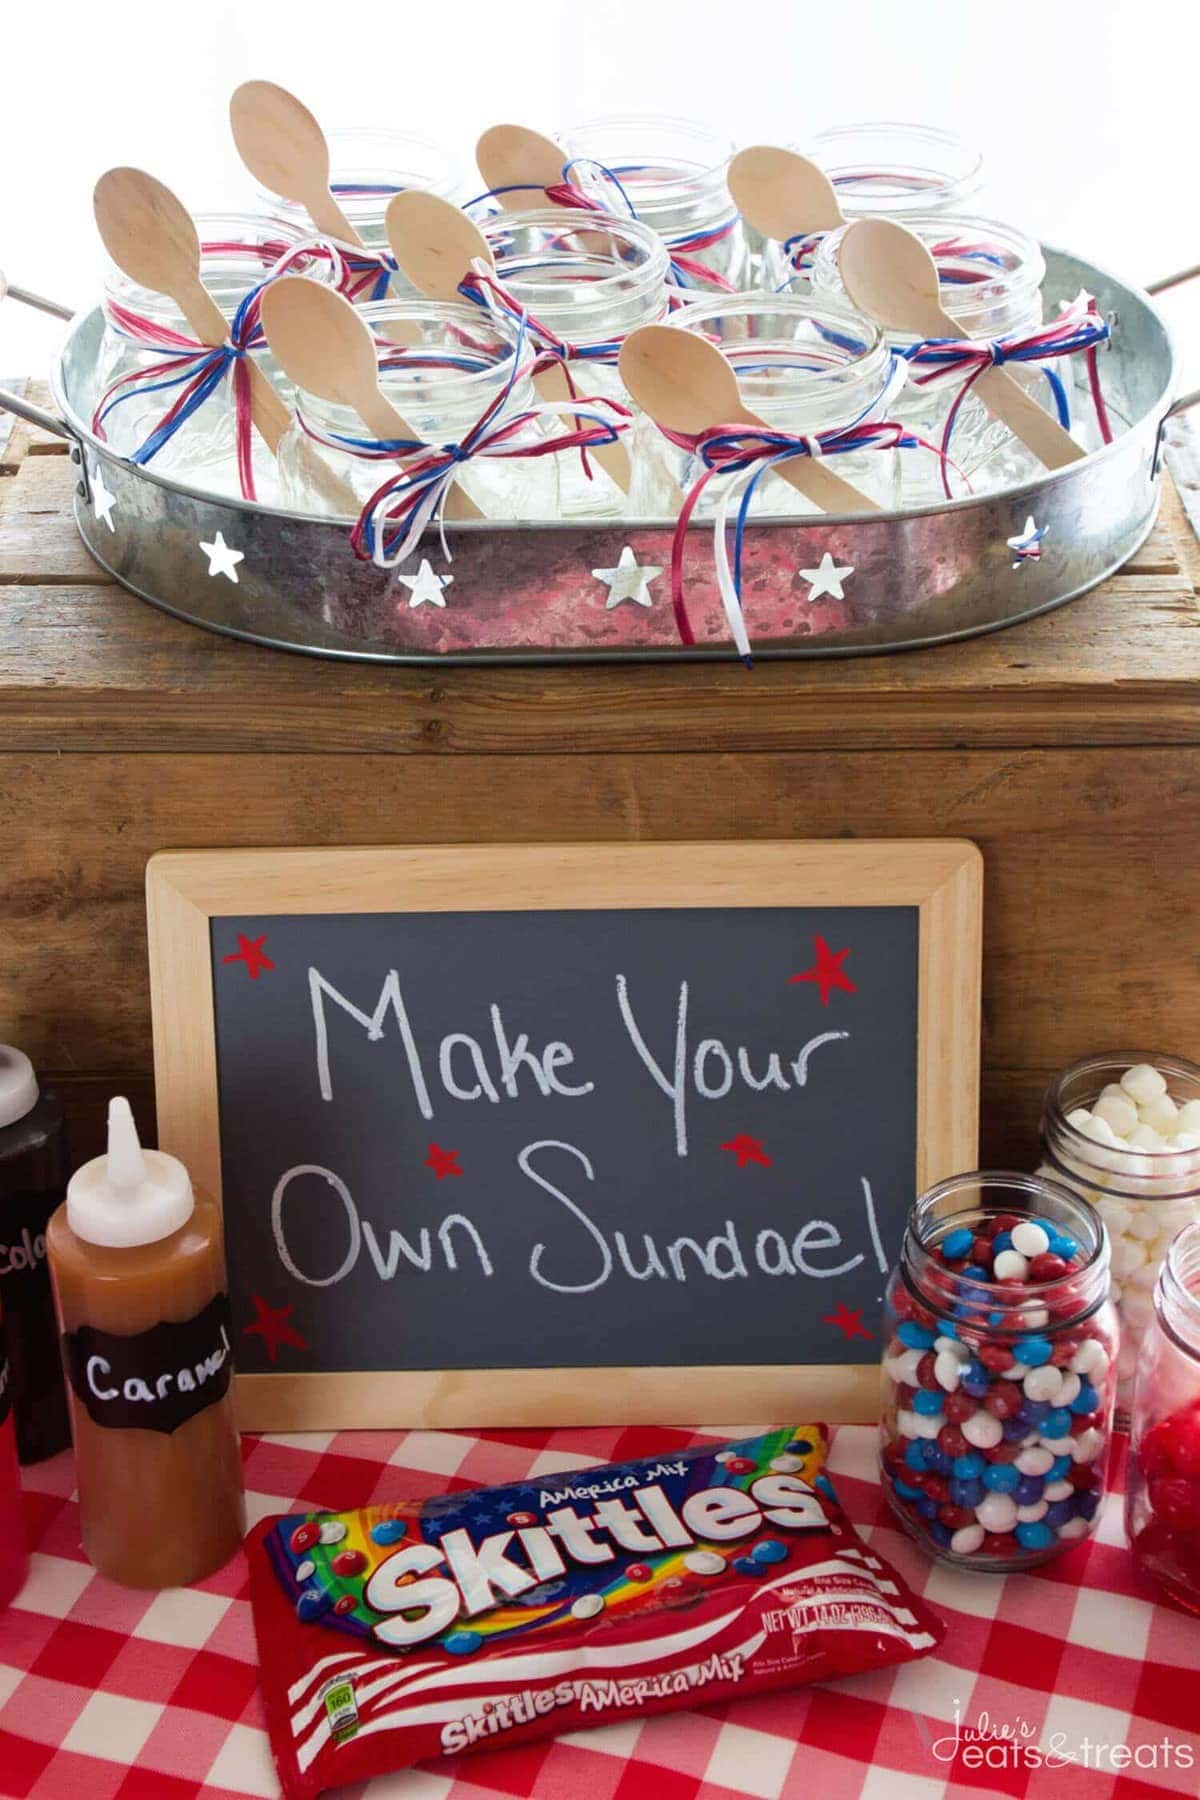 DIY Sundae Ice Cream Bar Party ~ Cool Off this Summer with a Festive DIY Sundae Bar! Grab Your Ice Cream, Toppings and Indulge in This Fun Treat! Perfect for a Summer Party!